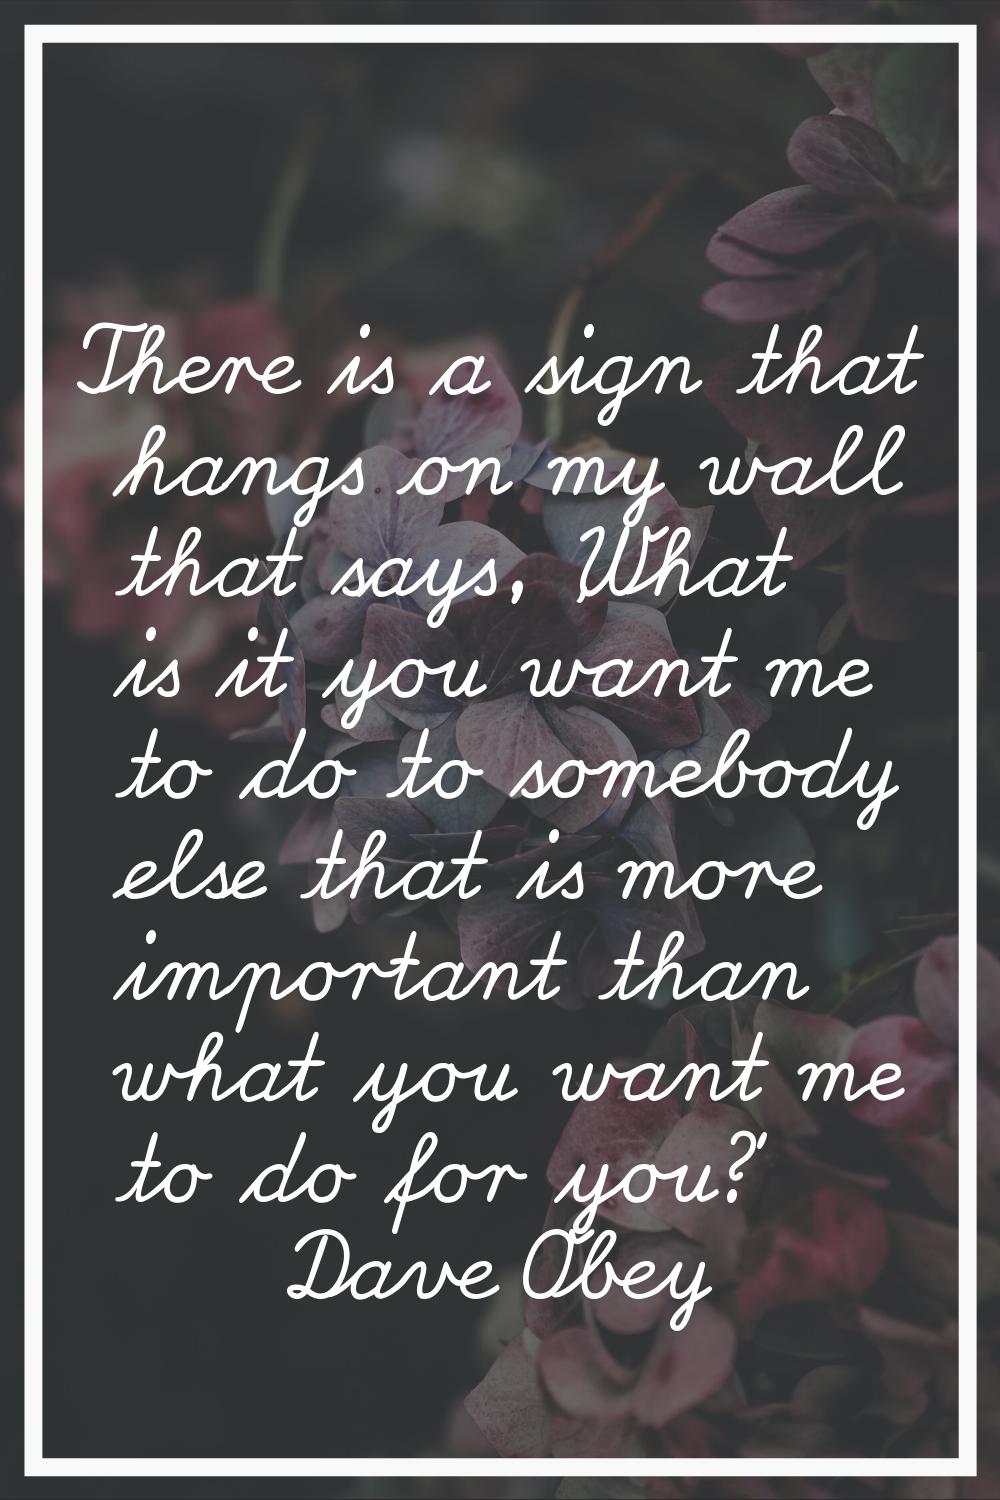 There is a sign that hangs on my wall that says, 'What is it you want me to do to somebody else tha